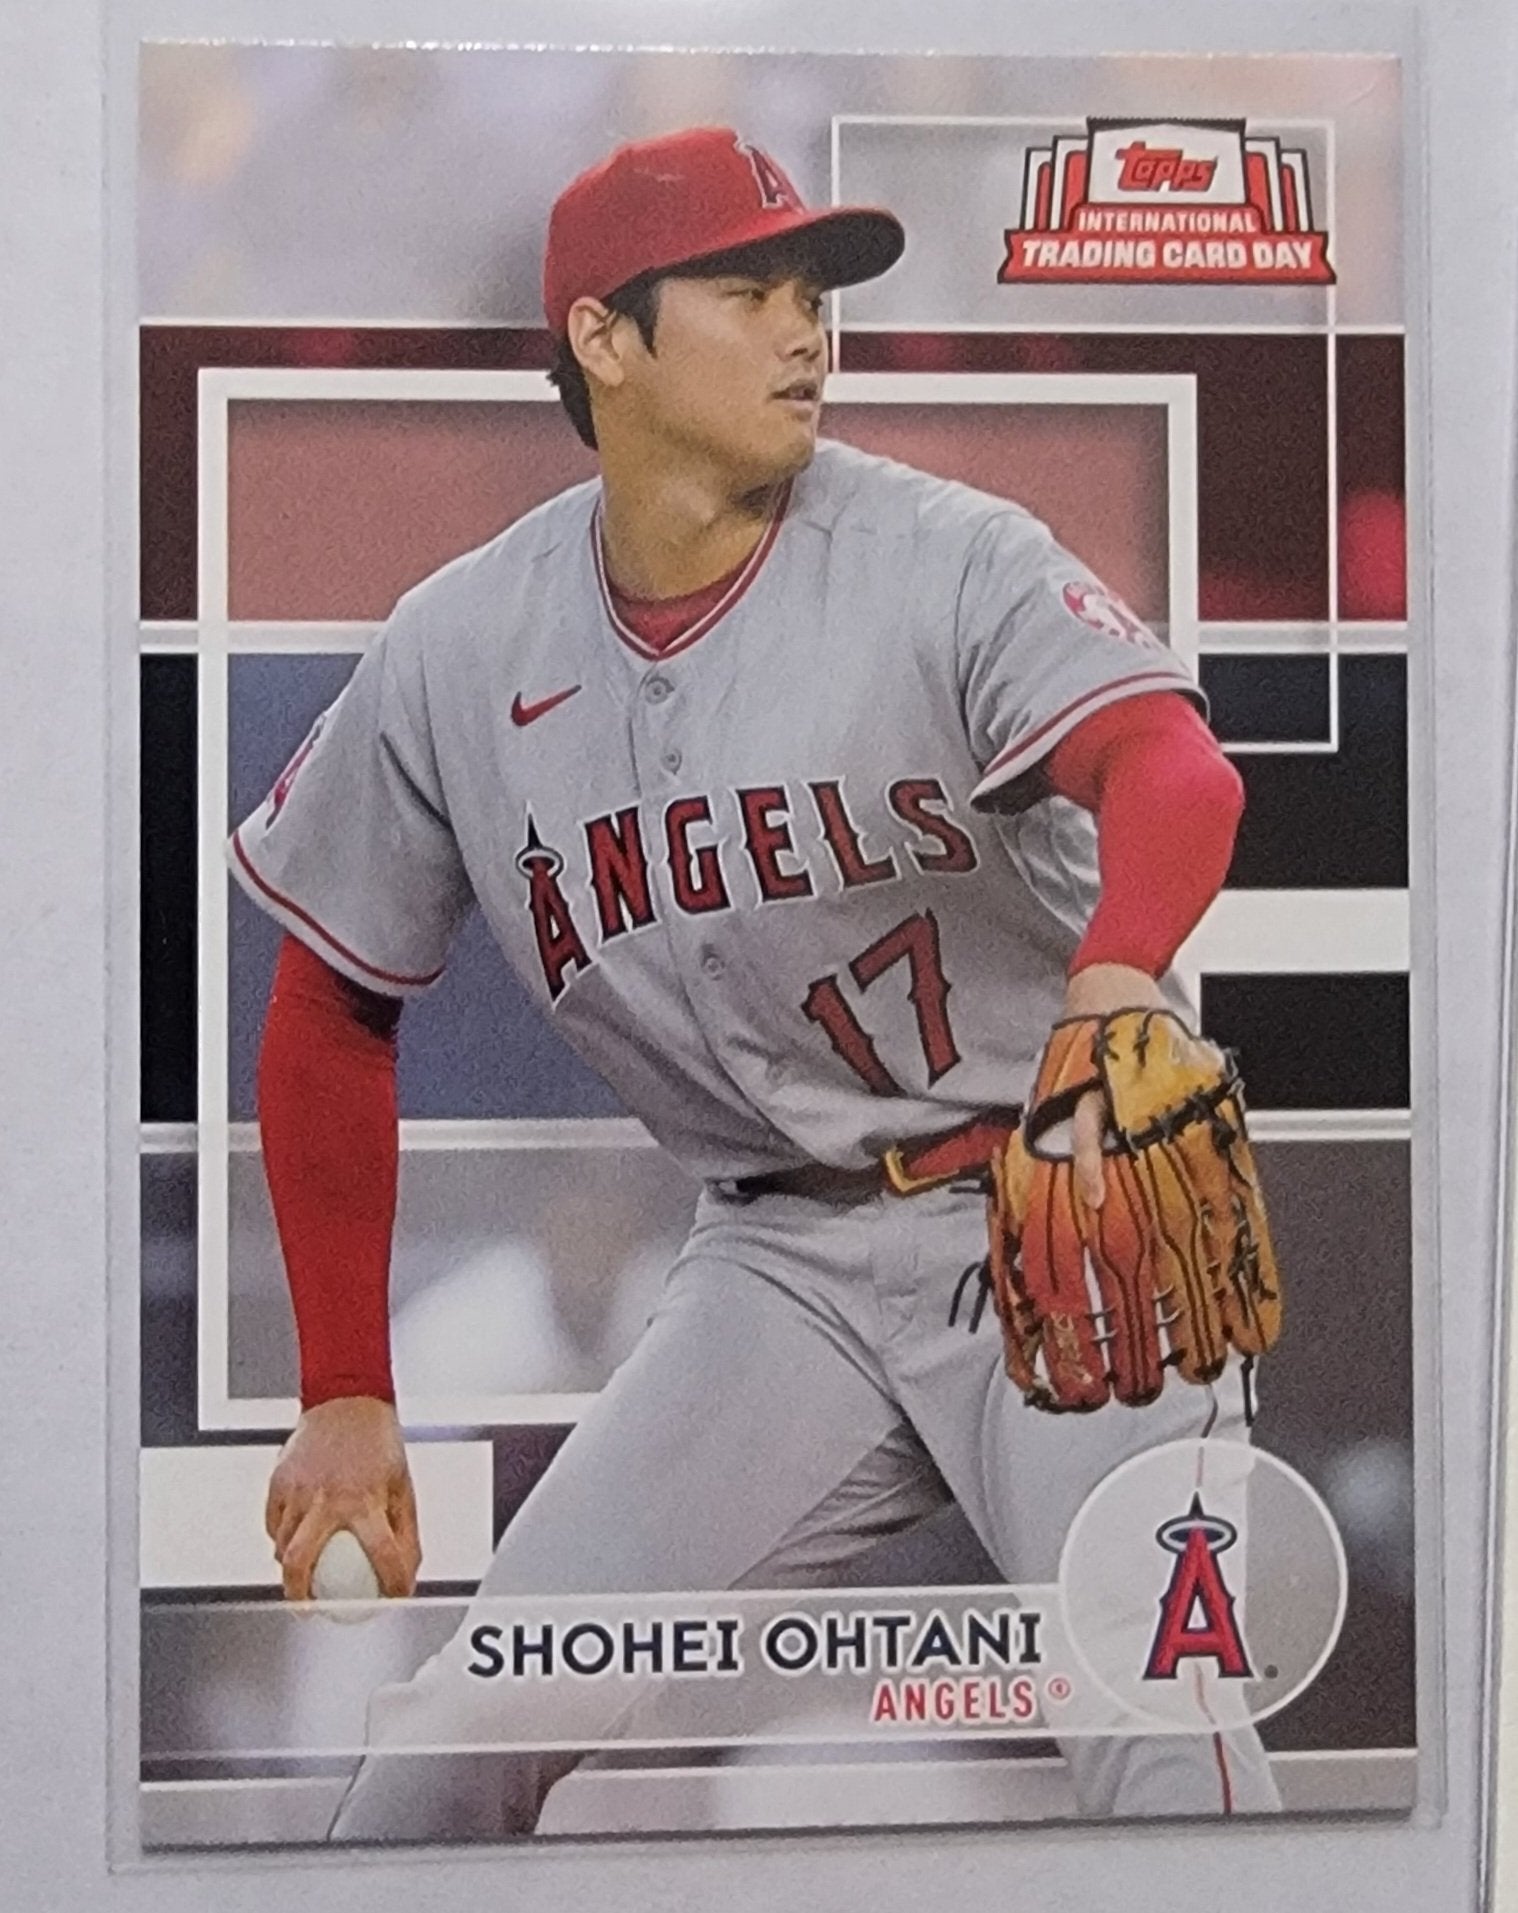 2022 Topps International Trading Card Day Shohei Ohtani Baseball Card AVM1 simple Xclusive Collectibles   